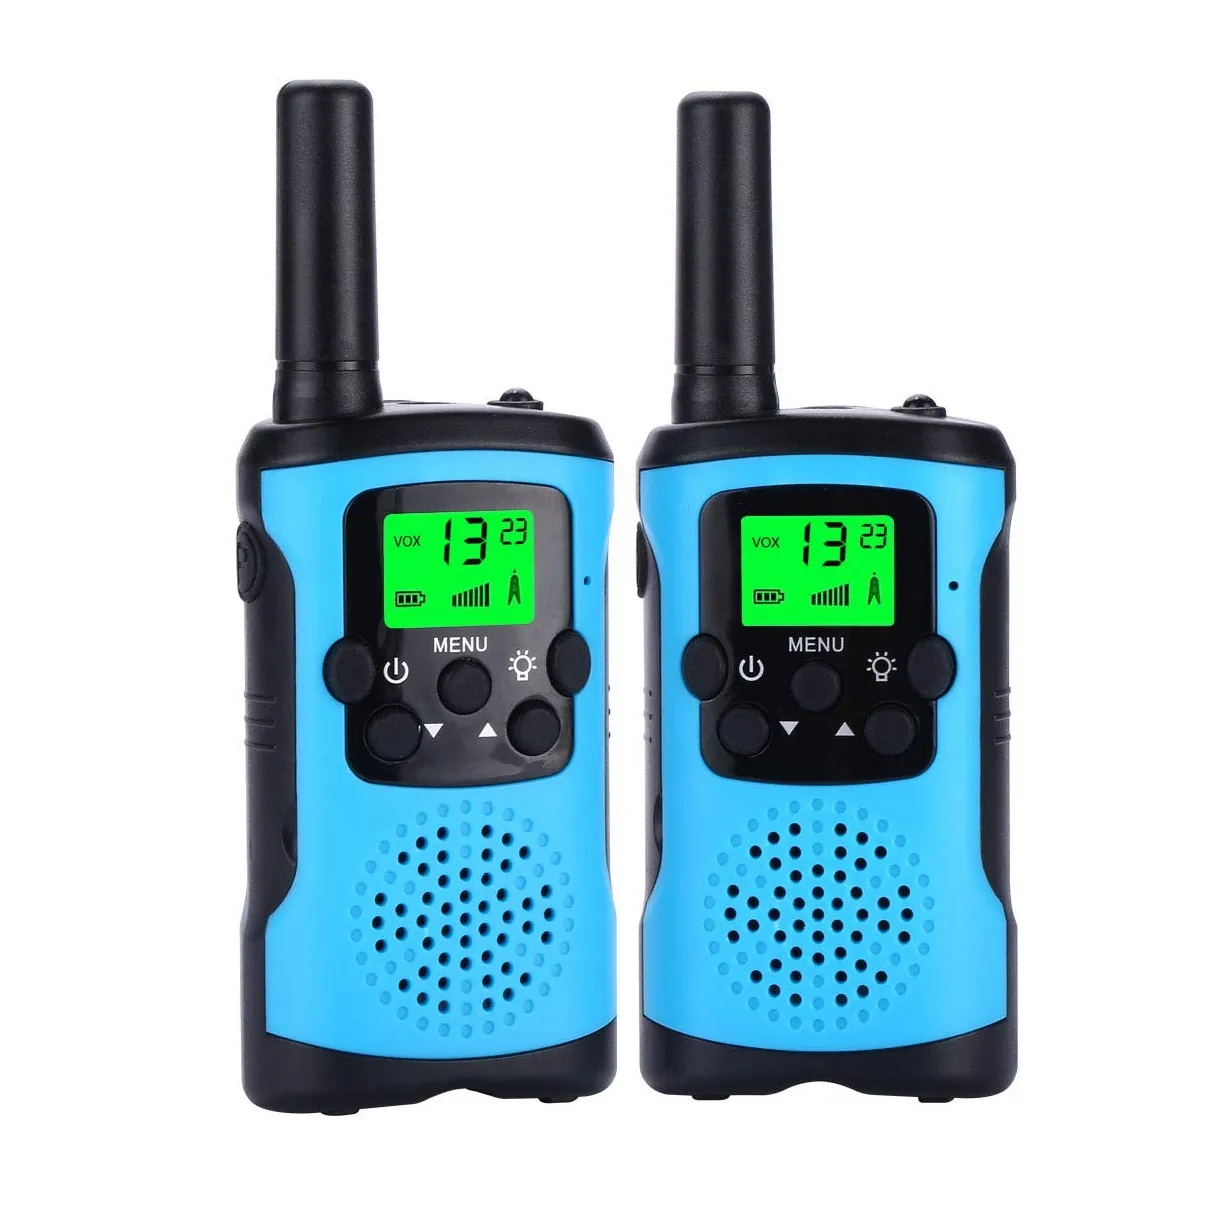 T340 Unlicensed Kids Walkie Talkie with CE RED fit for T388 BF-T3 Talkabout TLKR T42 T62 T82 0.5W PMR446 Toy Children's gifts